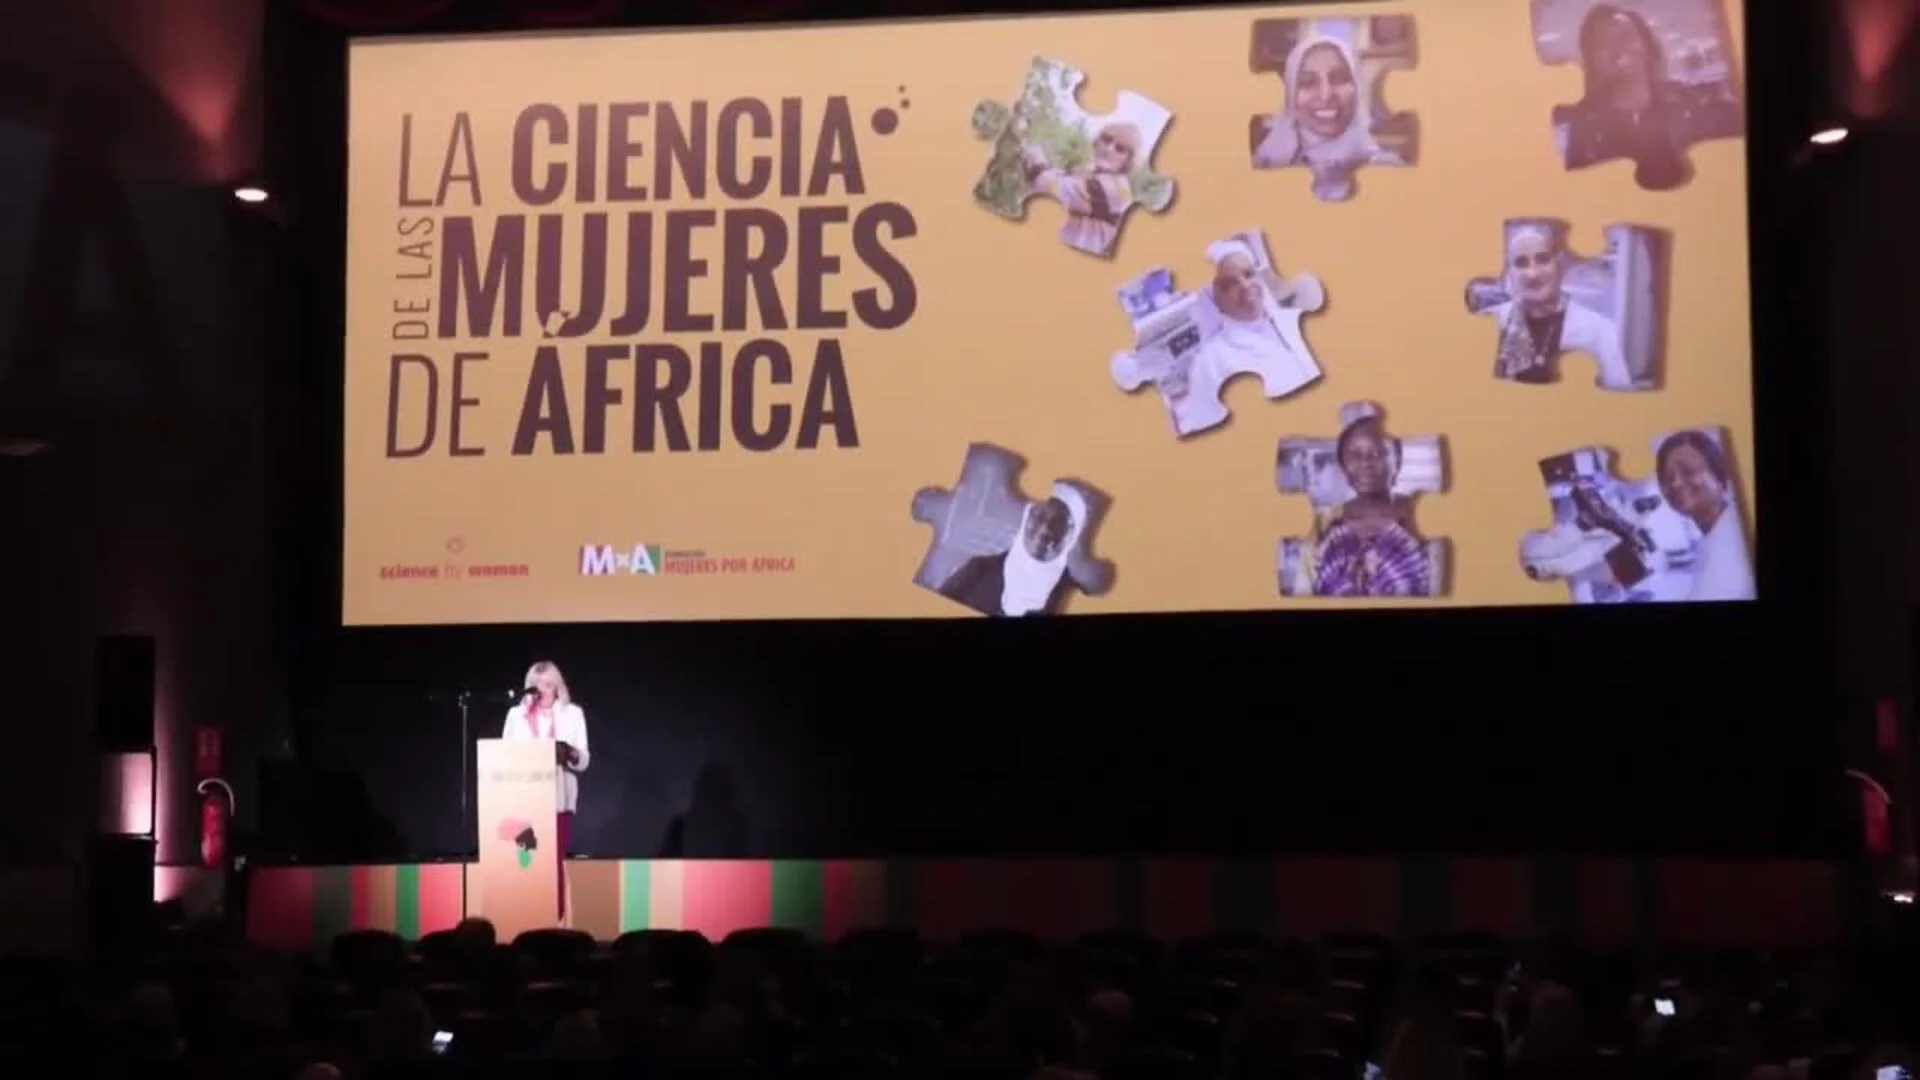 Queen Letizia attends the premiere of the documentary “African Women's Science”